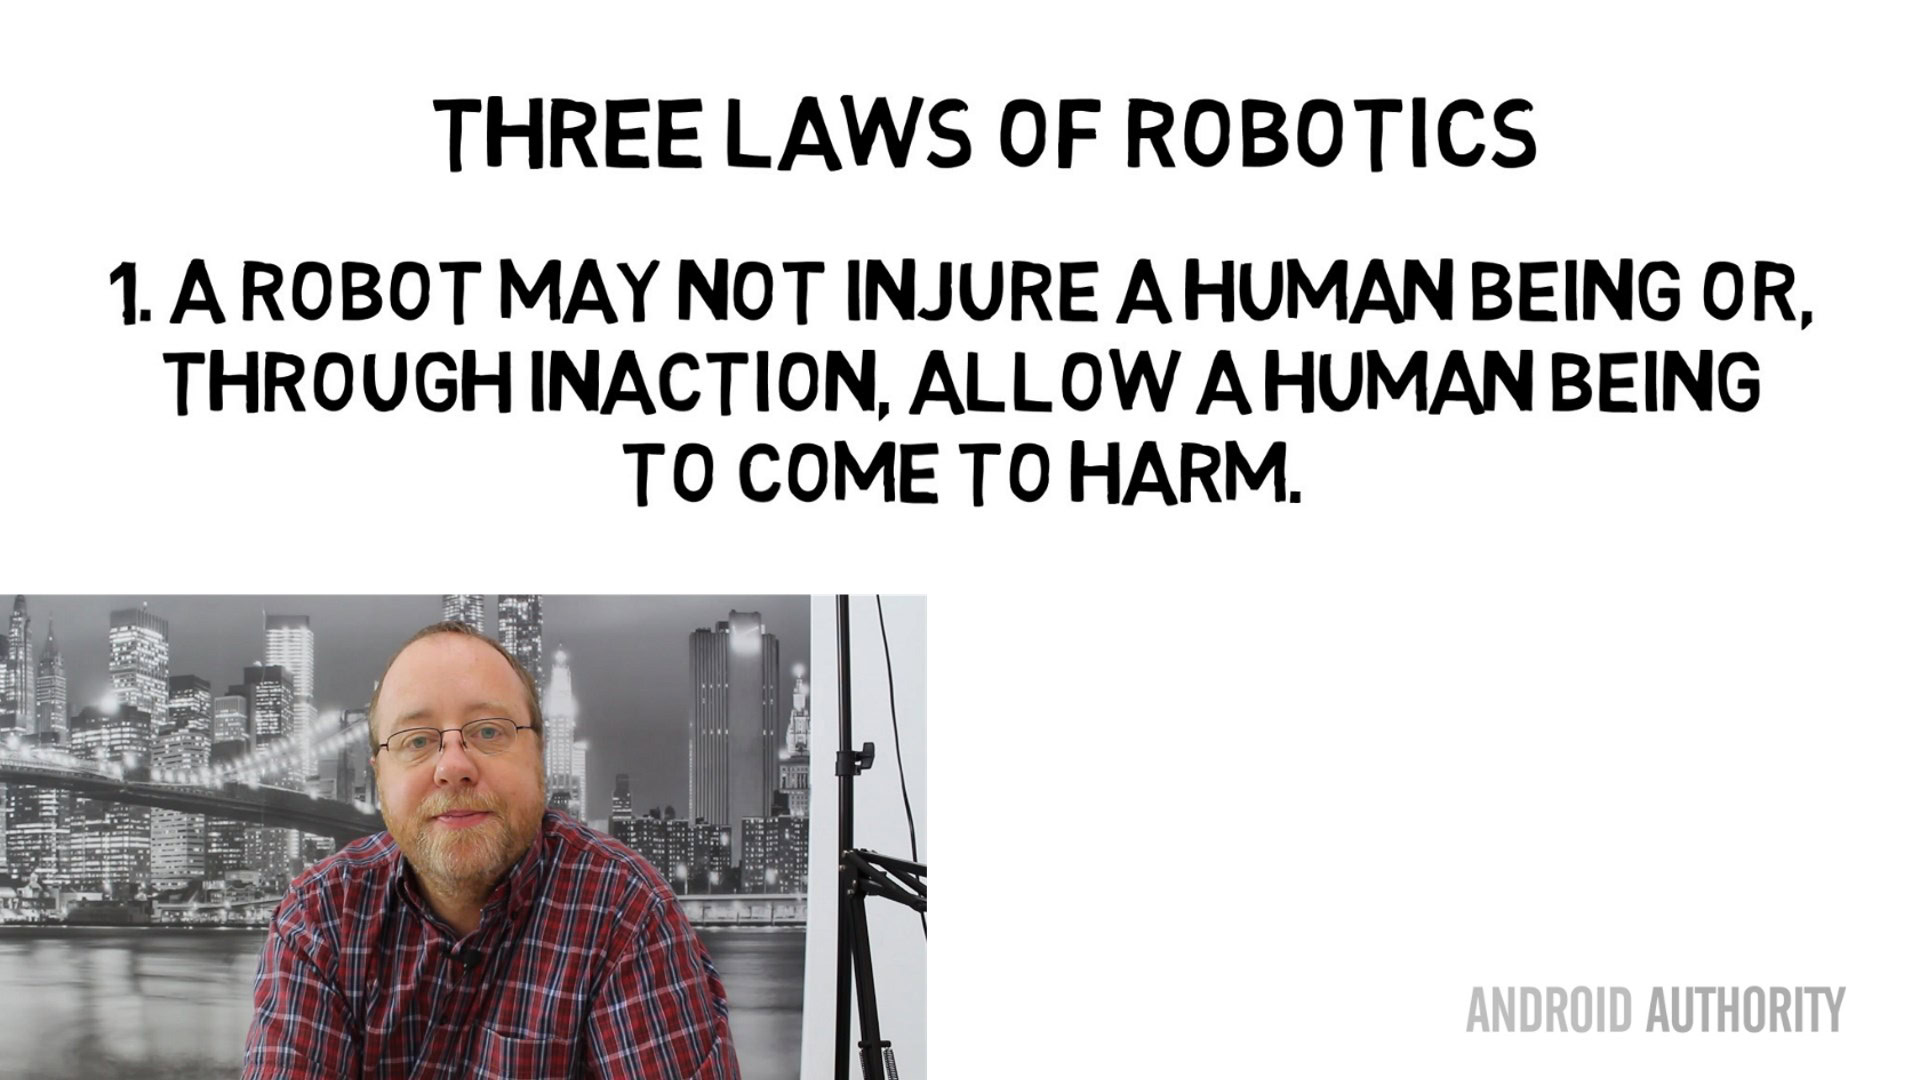 Why the three laws of robotics save us from Google's AIs